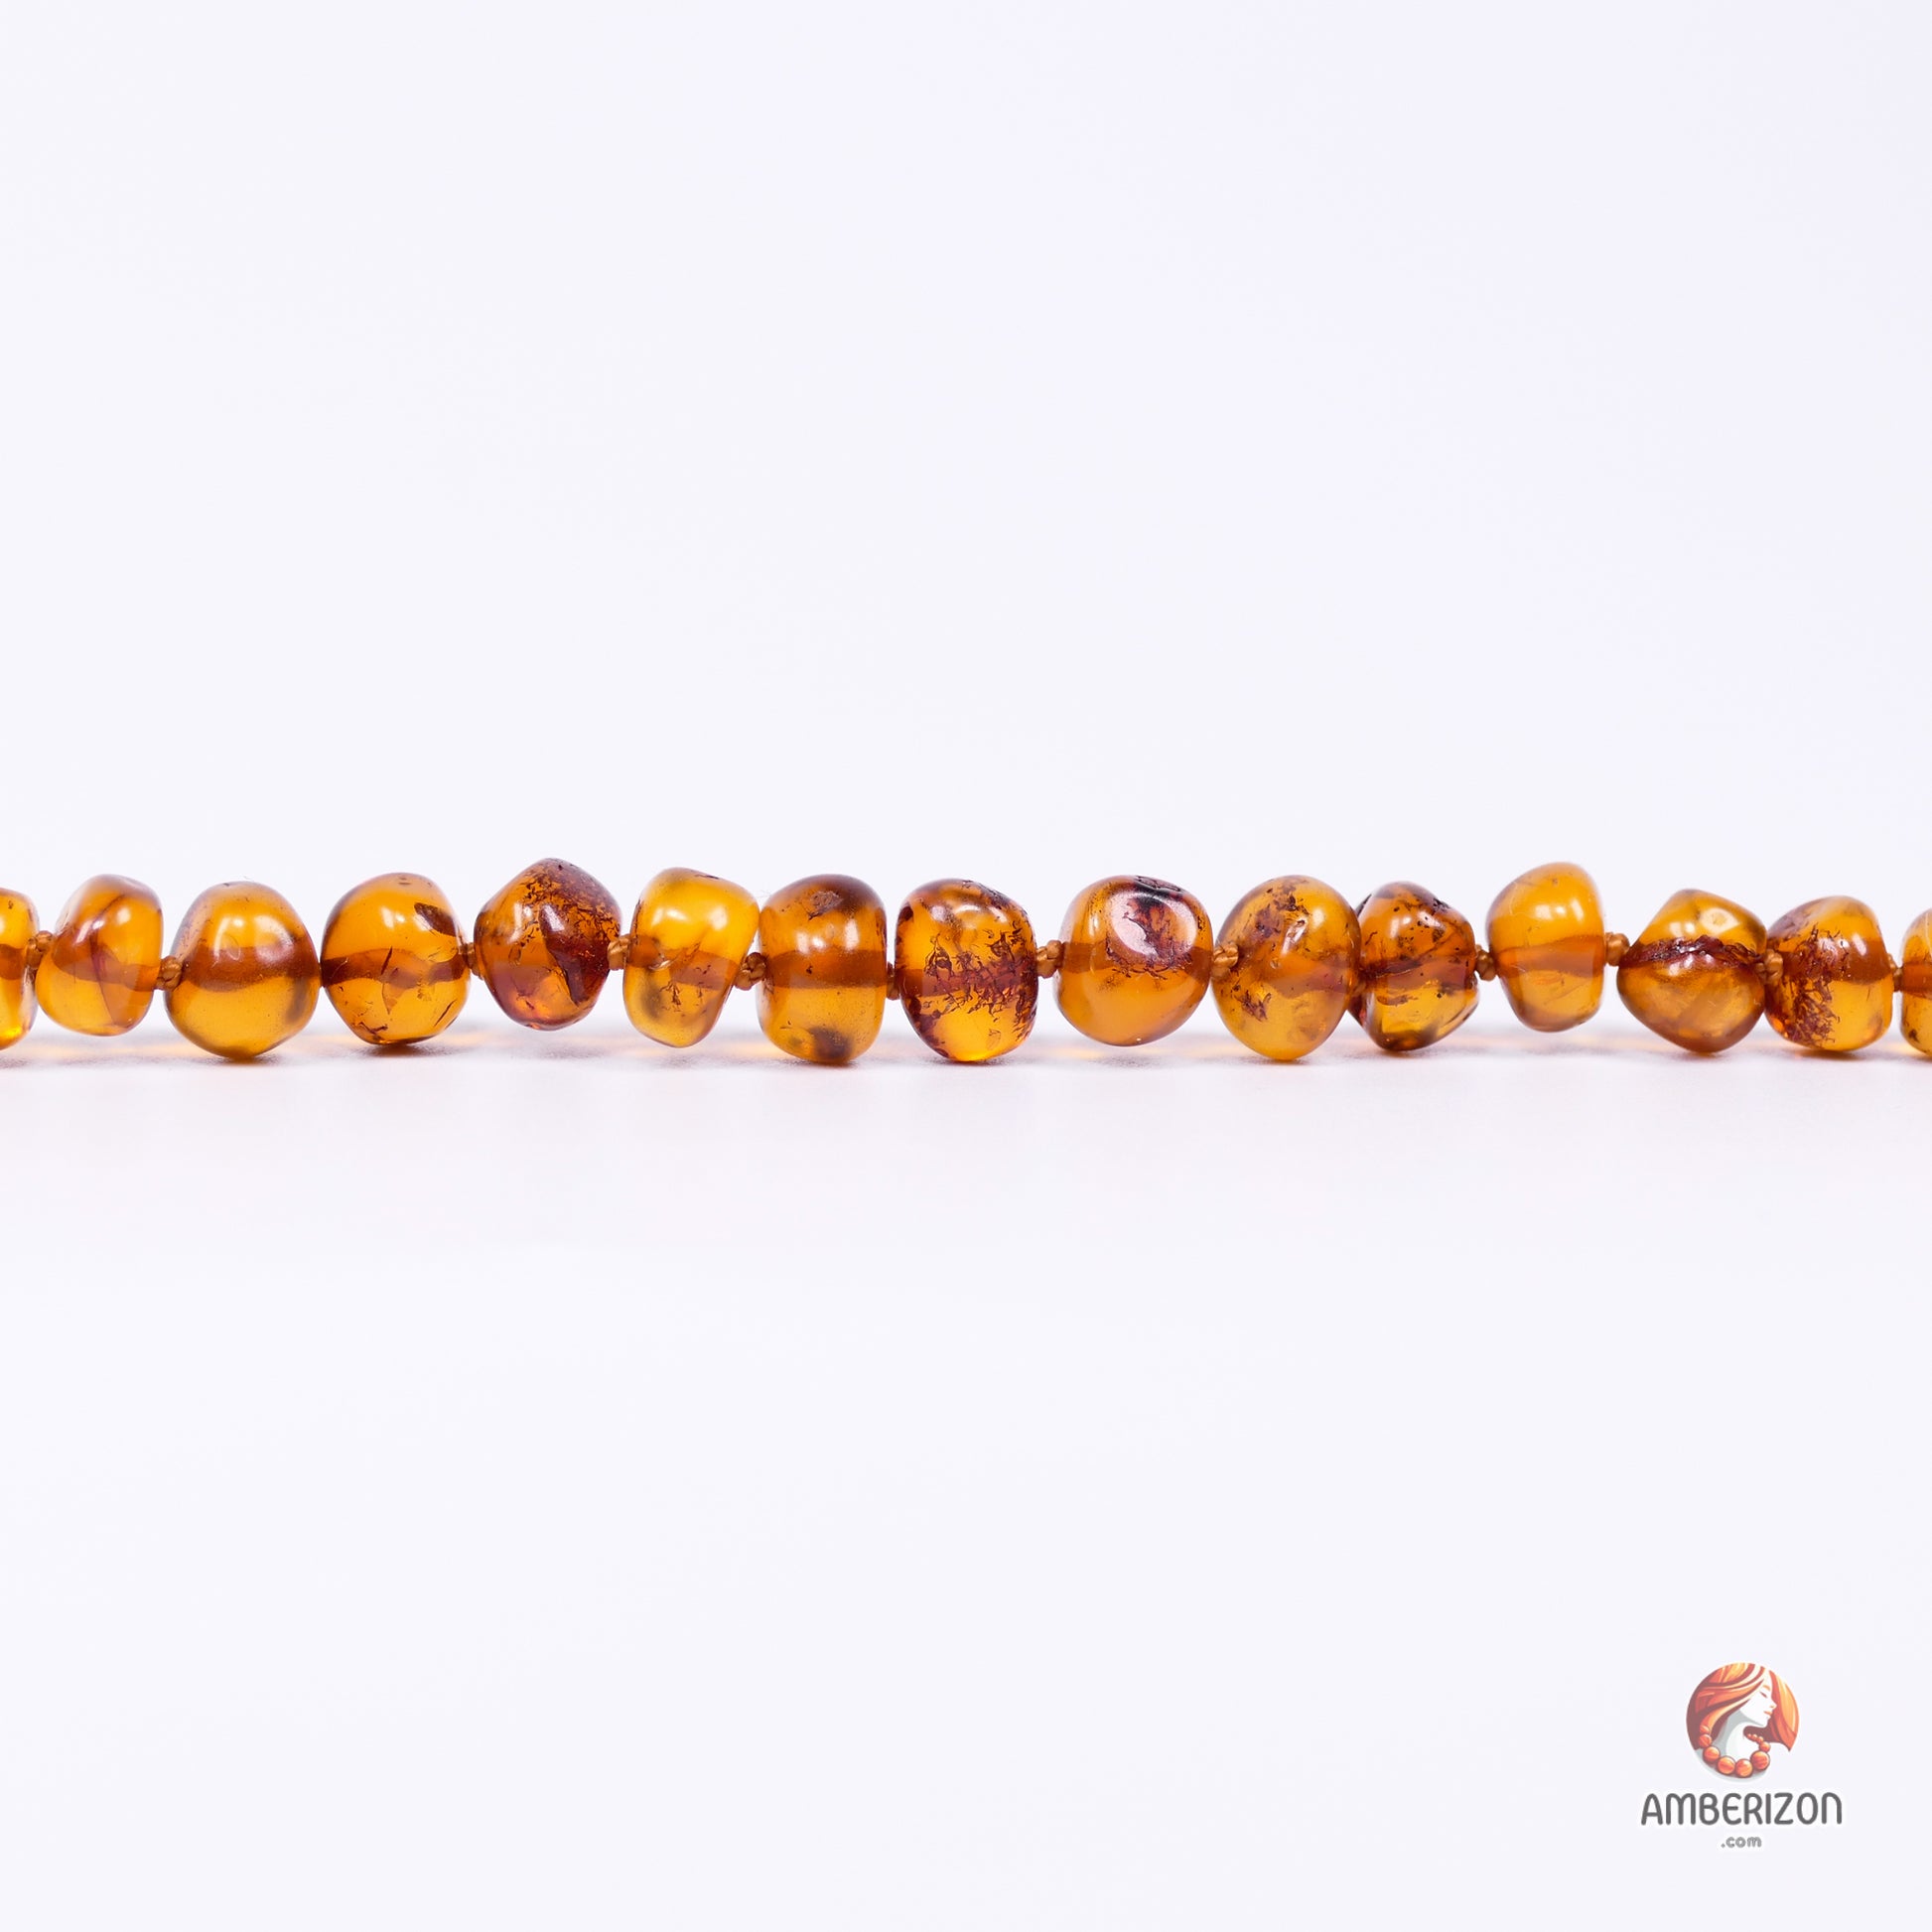 Genuine Adult Baltic Amber Necklace - Handcrafted in Lithuania